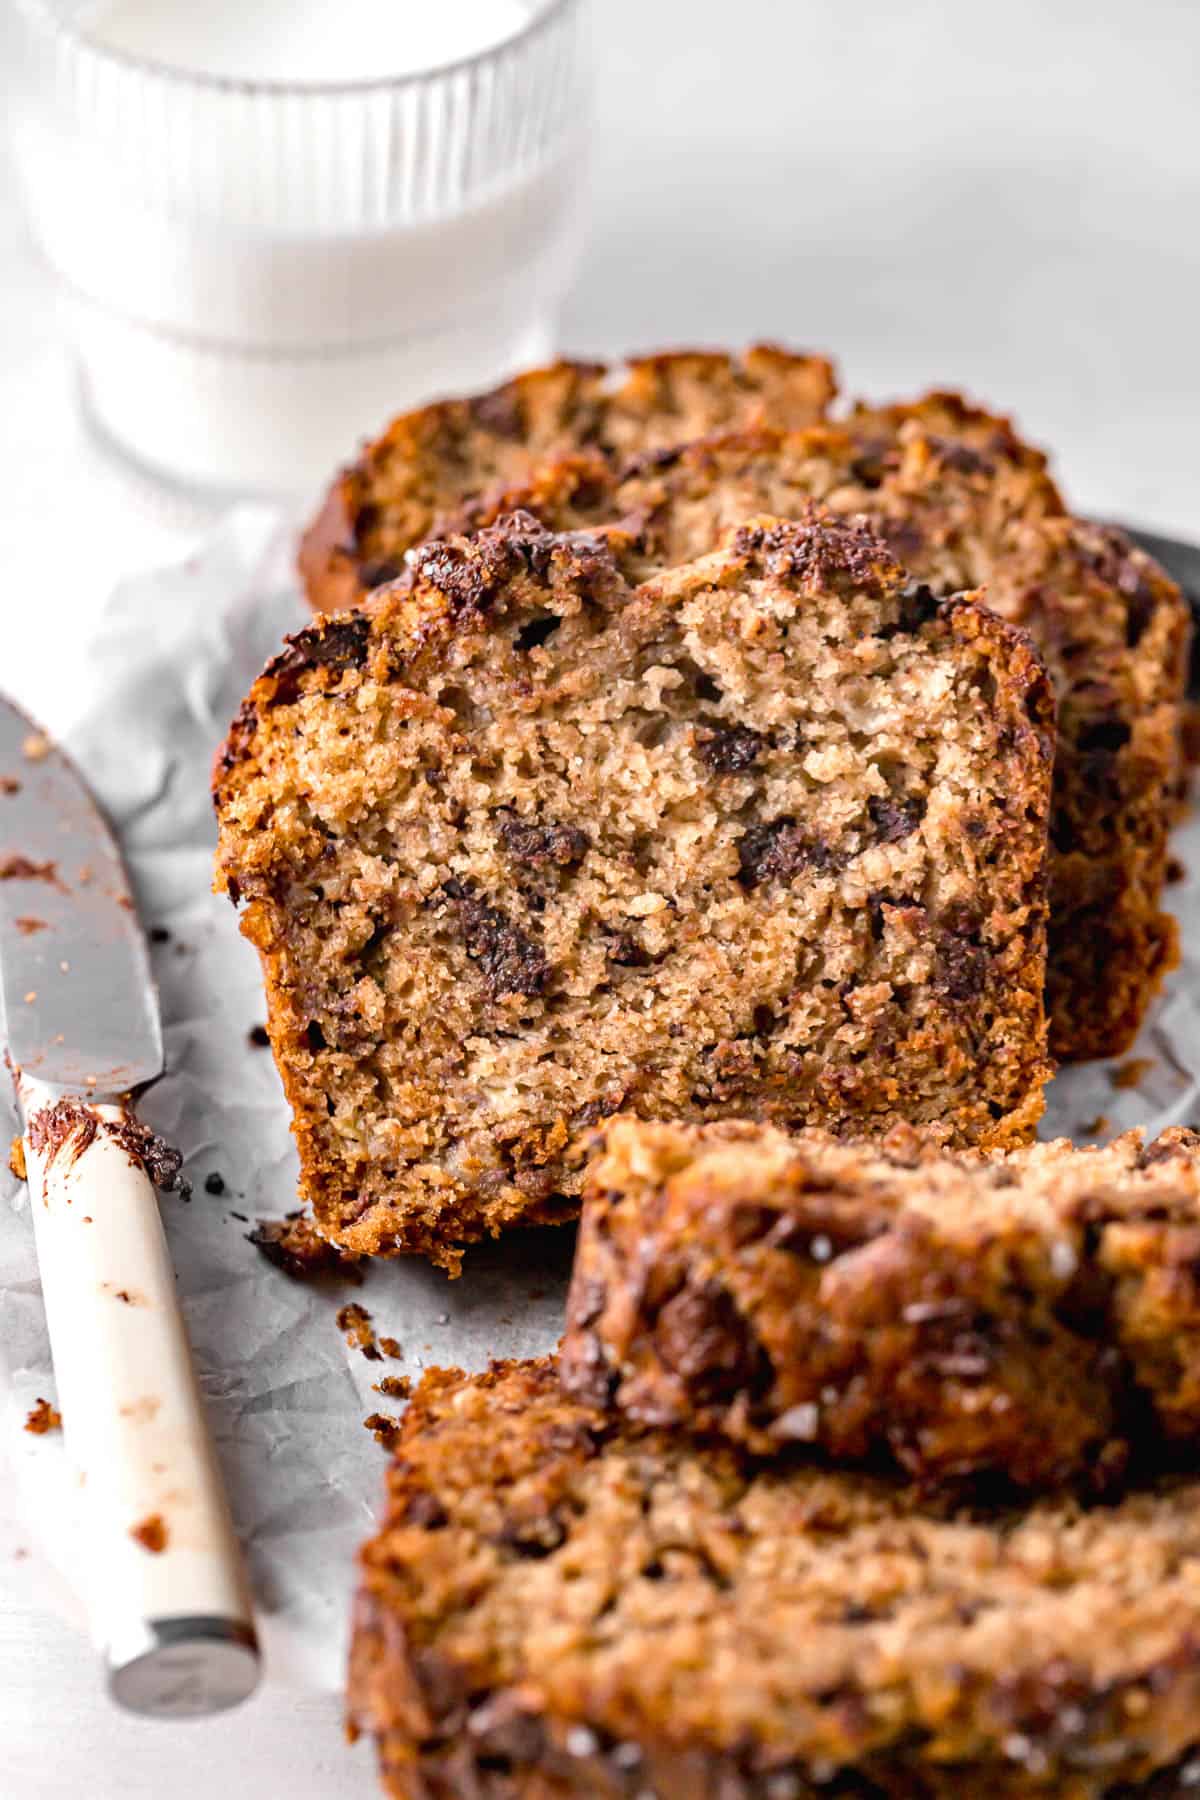 honey banana bread with chocolate chips sliced to show inside texture.